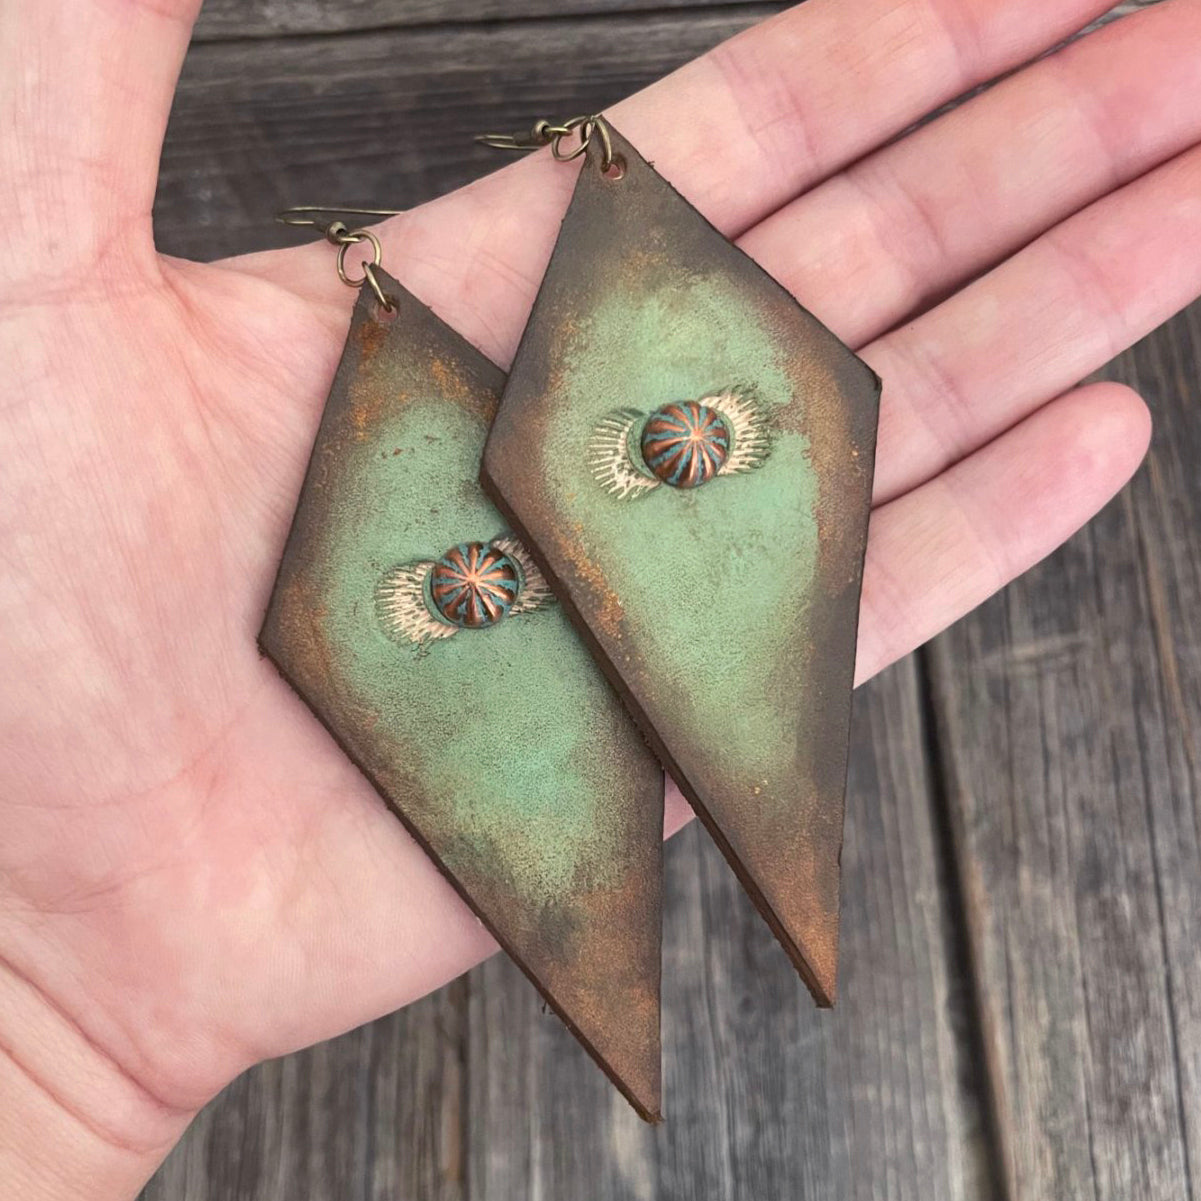 MADE TO ORDER - One of a Kind, genuine leather big statement rhomboid boho handmade earrings with rivets